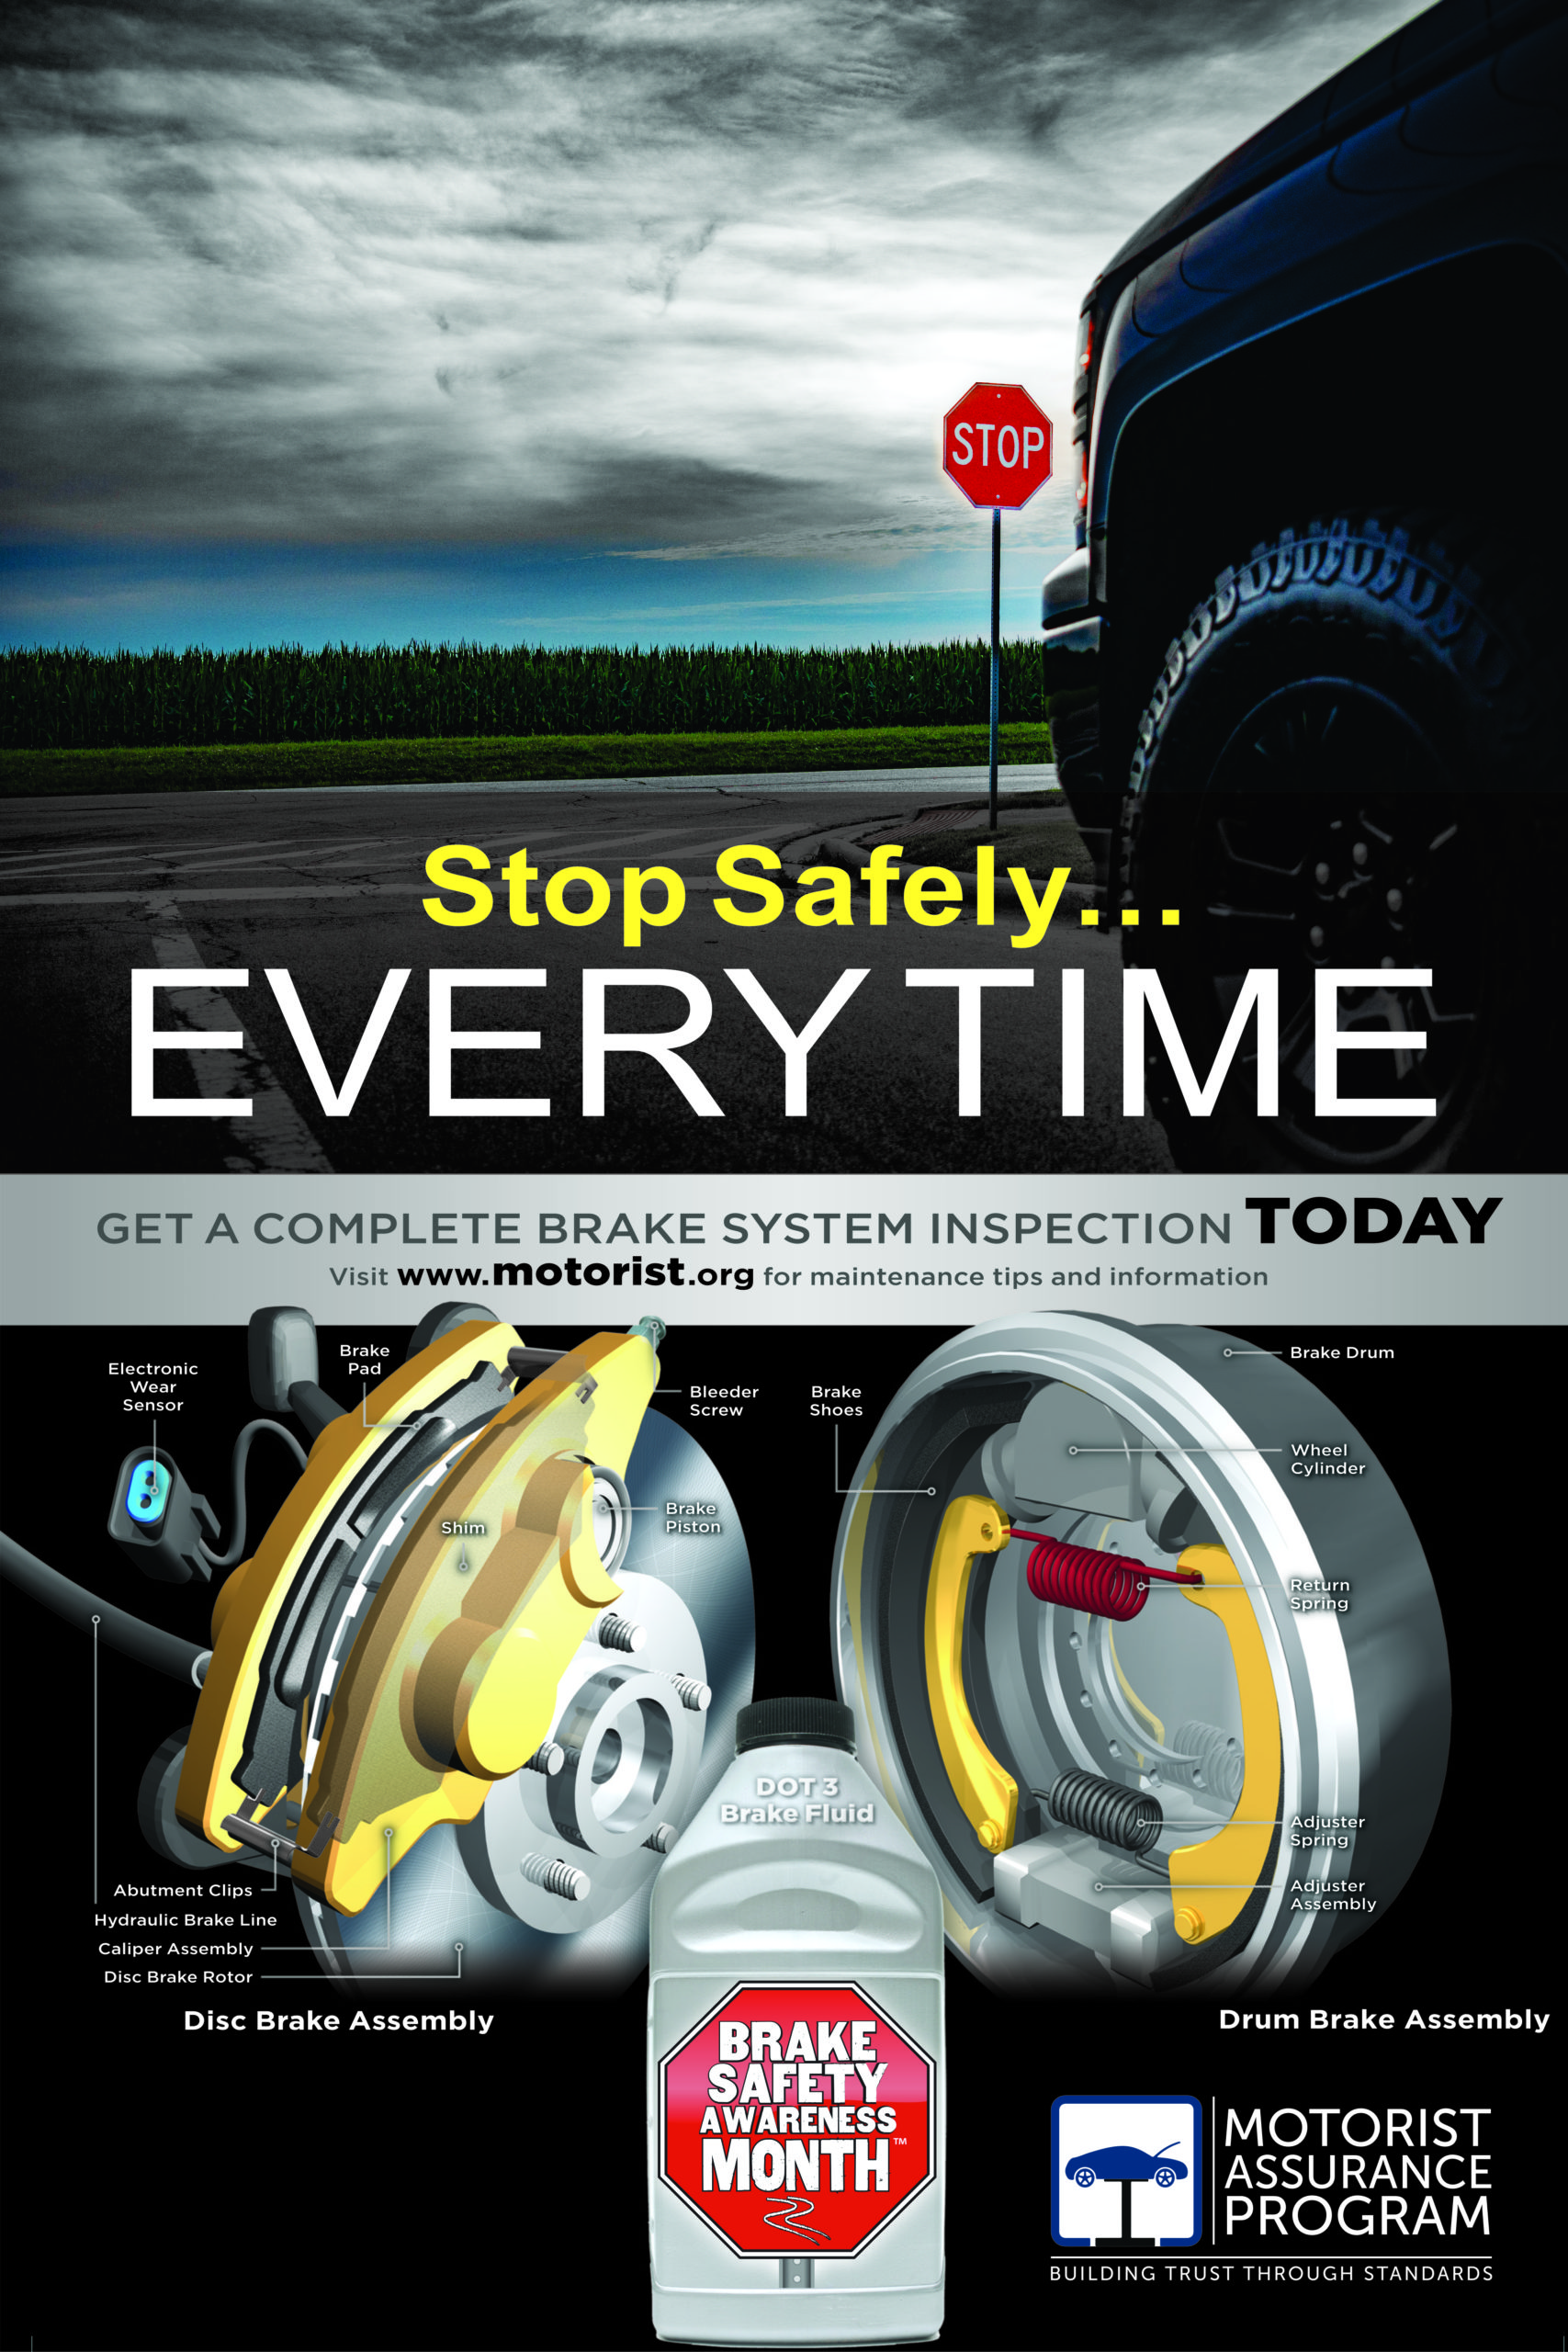 August is Brake Safety Awareness Month